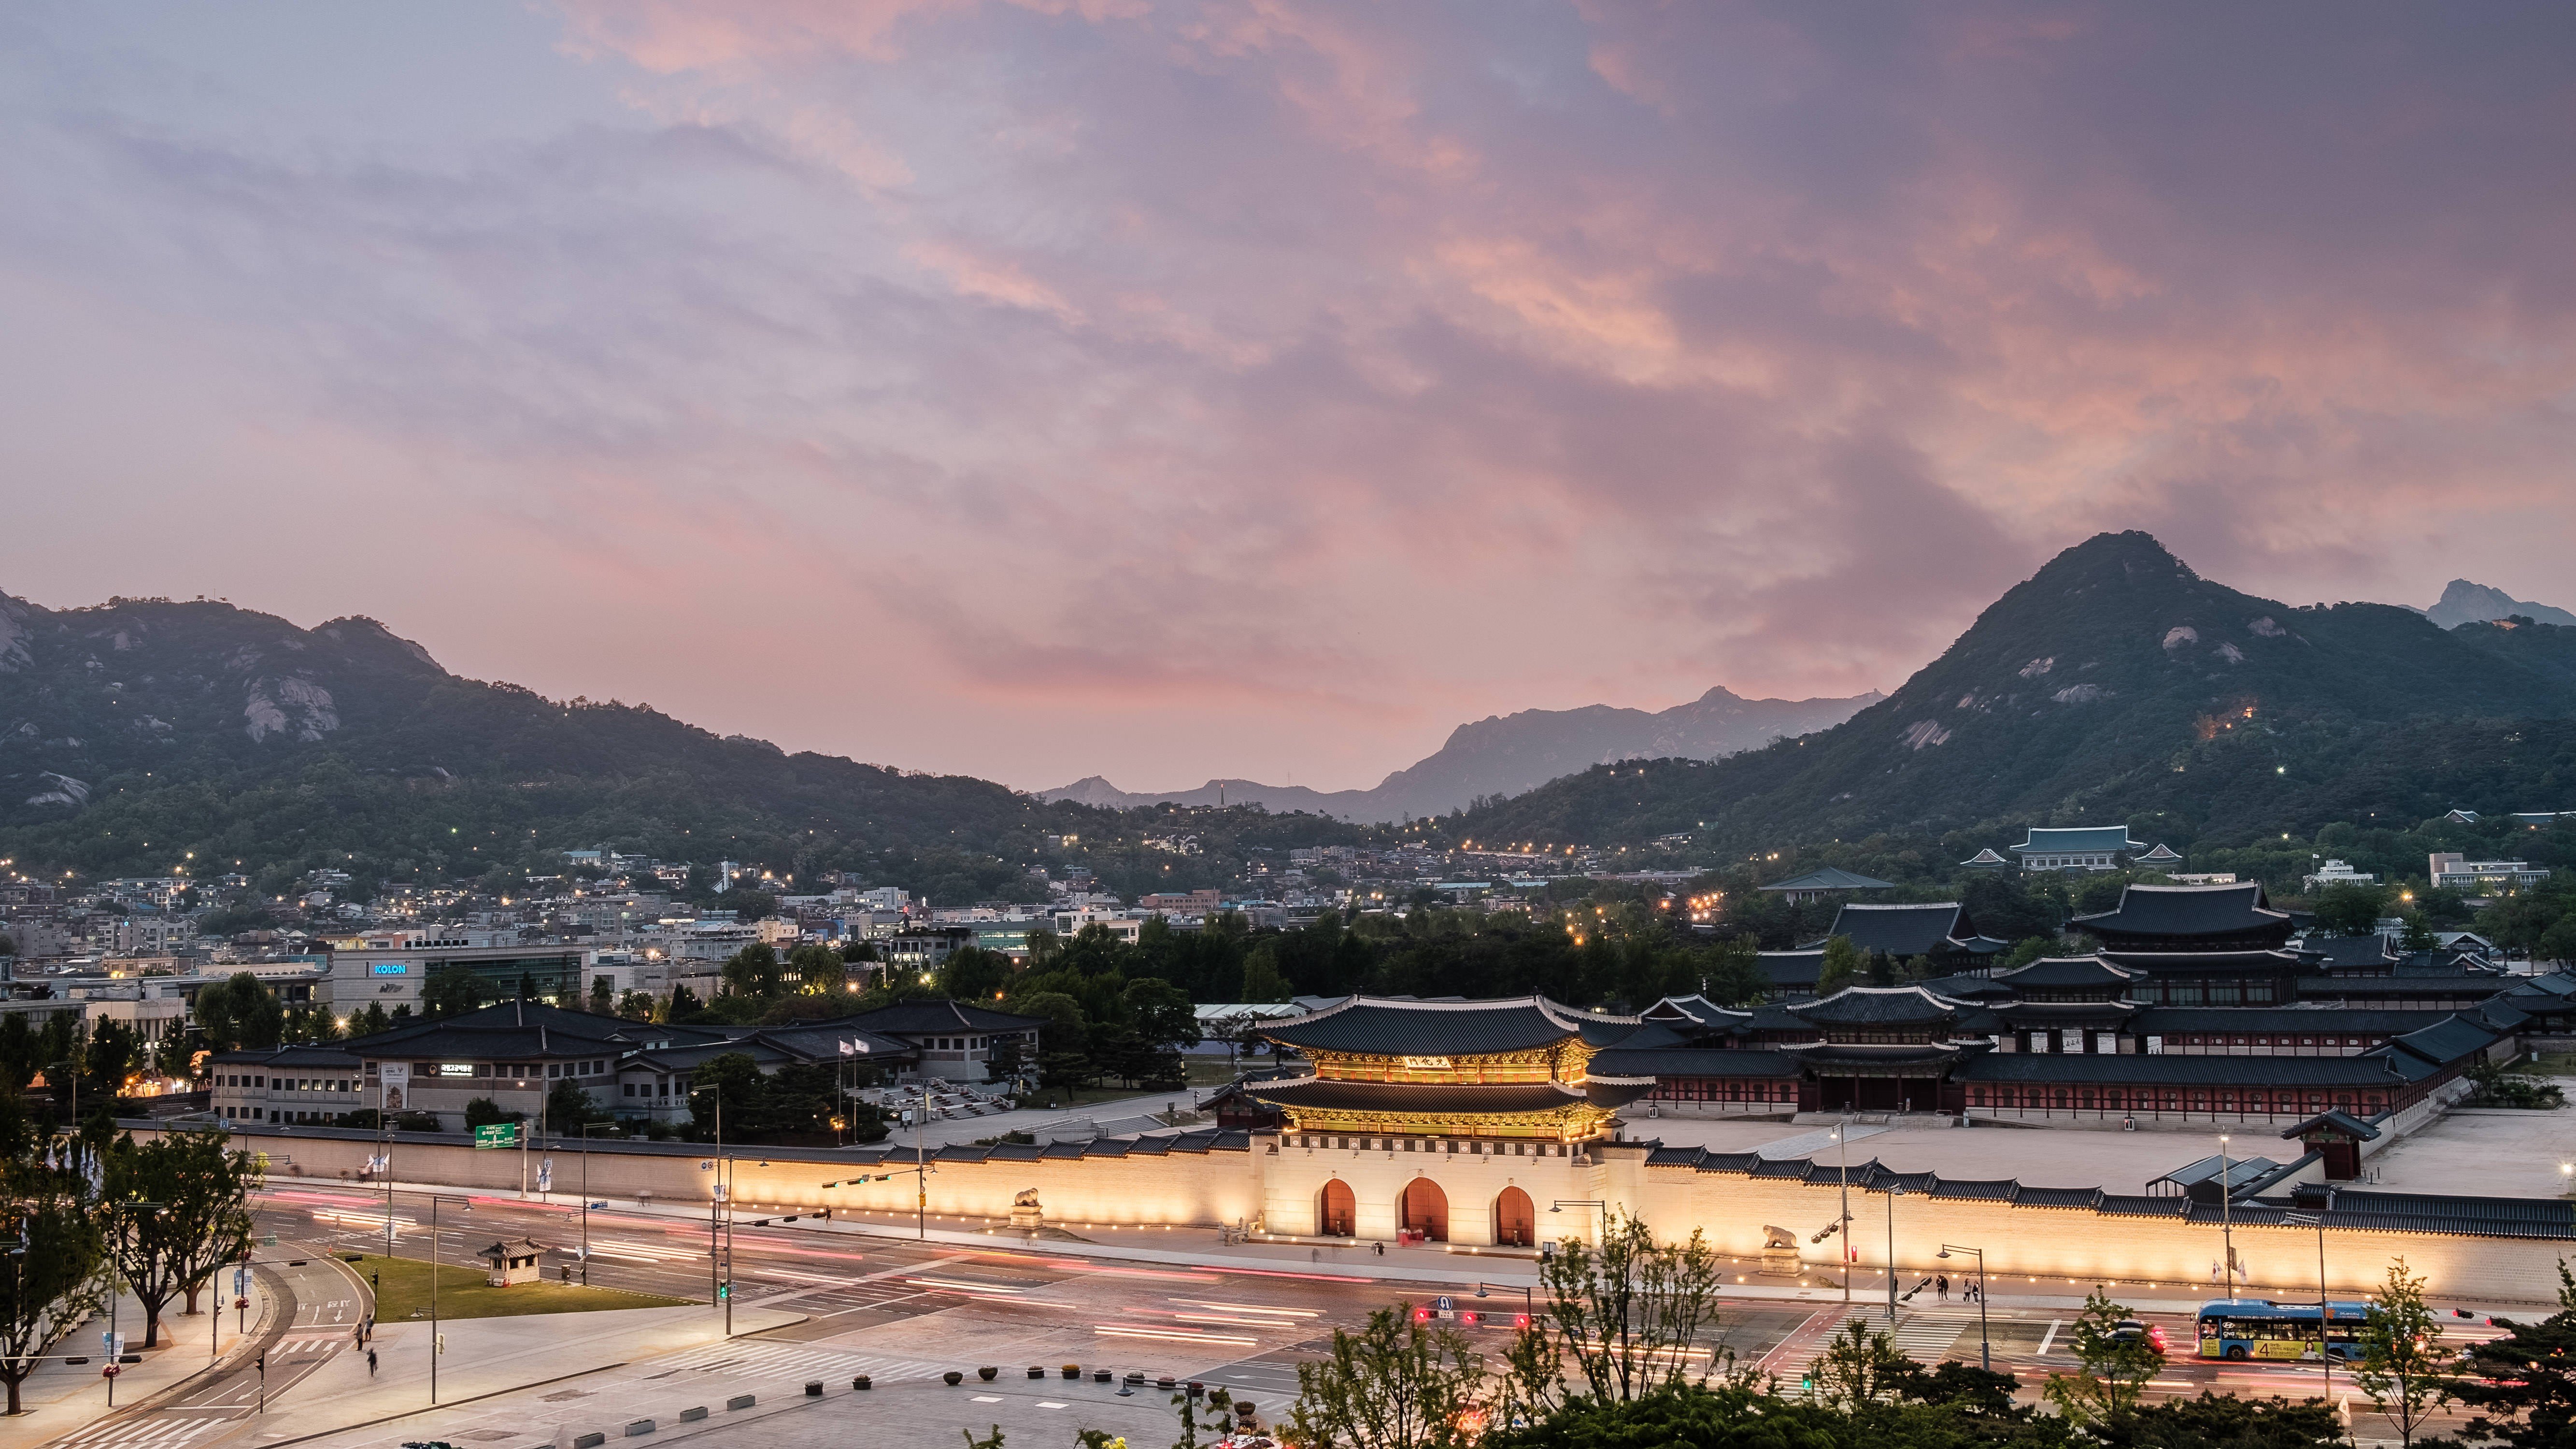 Spice up your time in Seoul with our guide to fun and fascinating experiences, whether it is pampering in the airport, a quick trip to Chinatown, or a longer jaunt to Jamsil Special Tourist Zone to see the world’s fifth tallest building